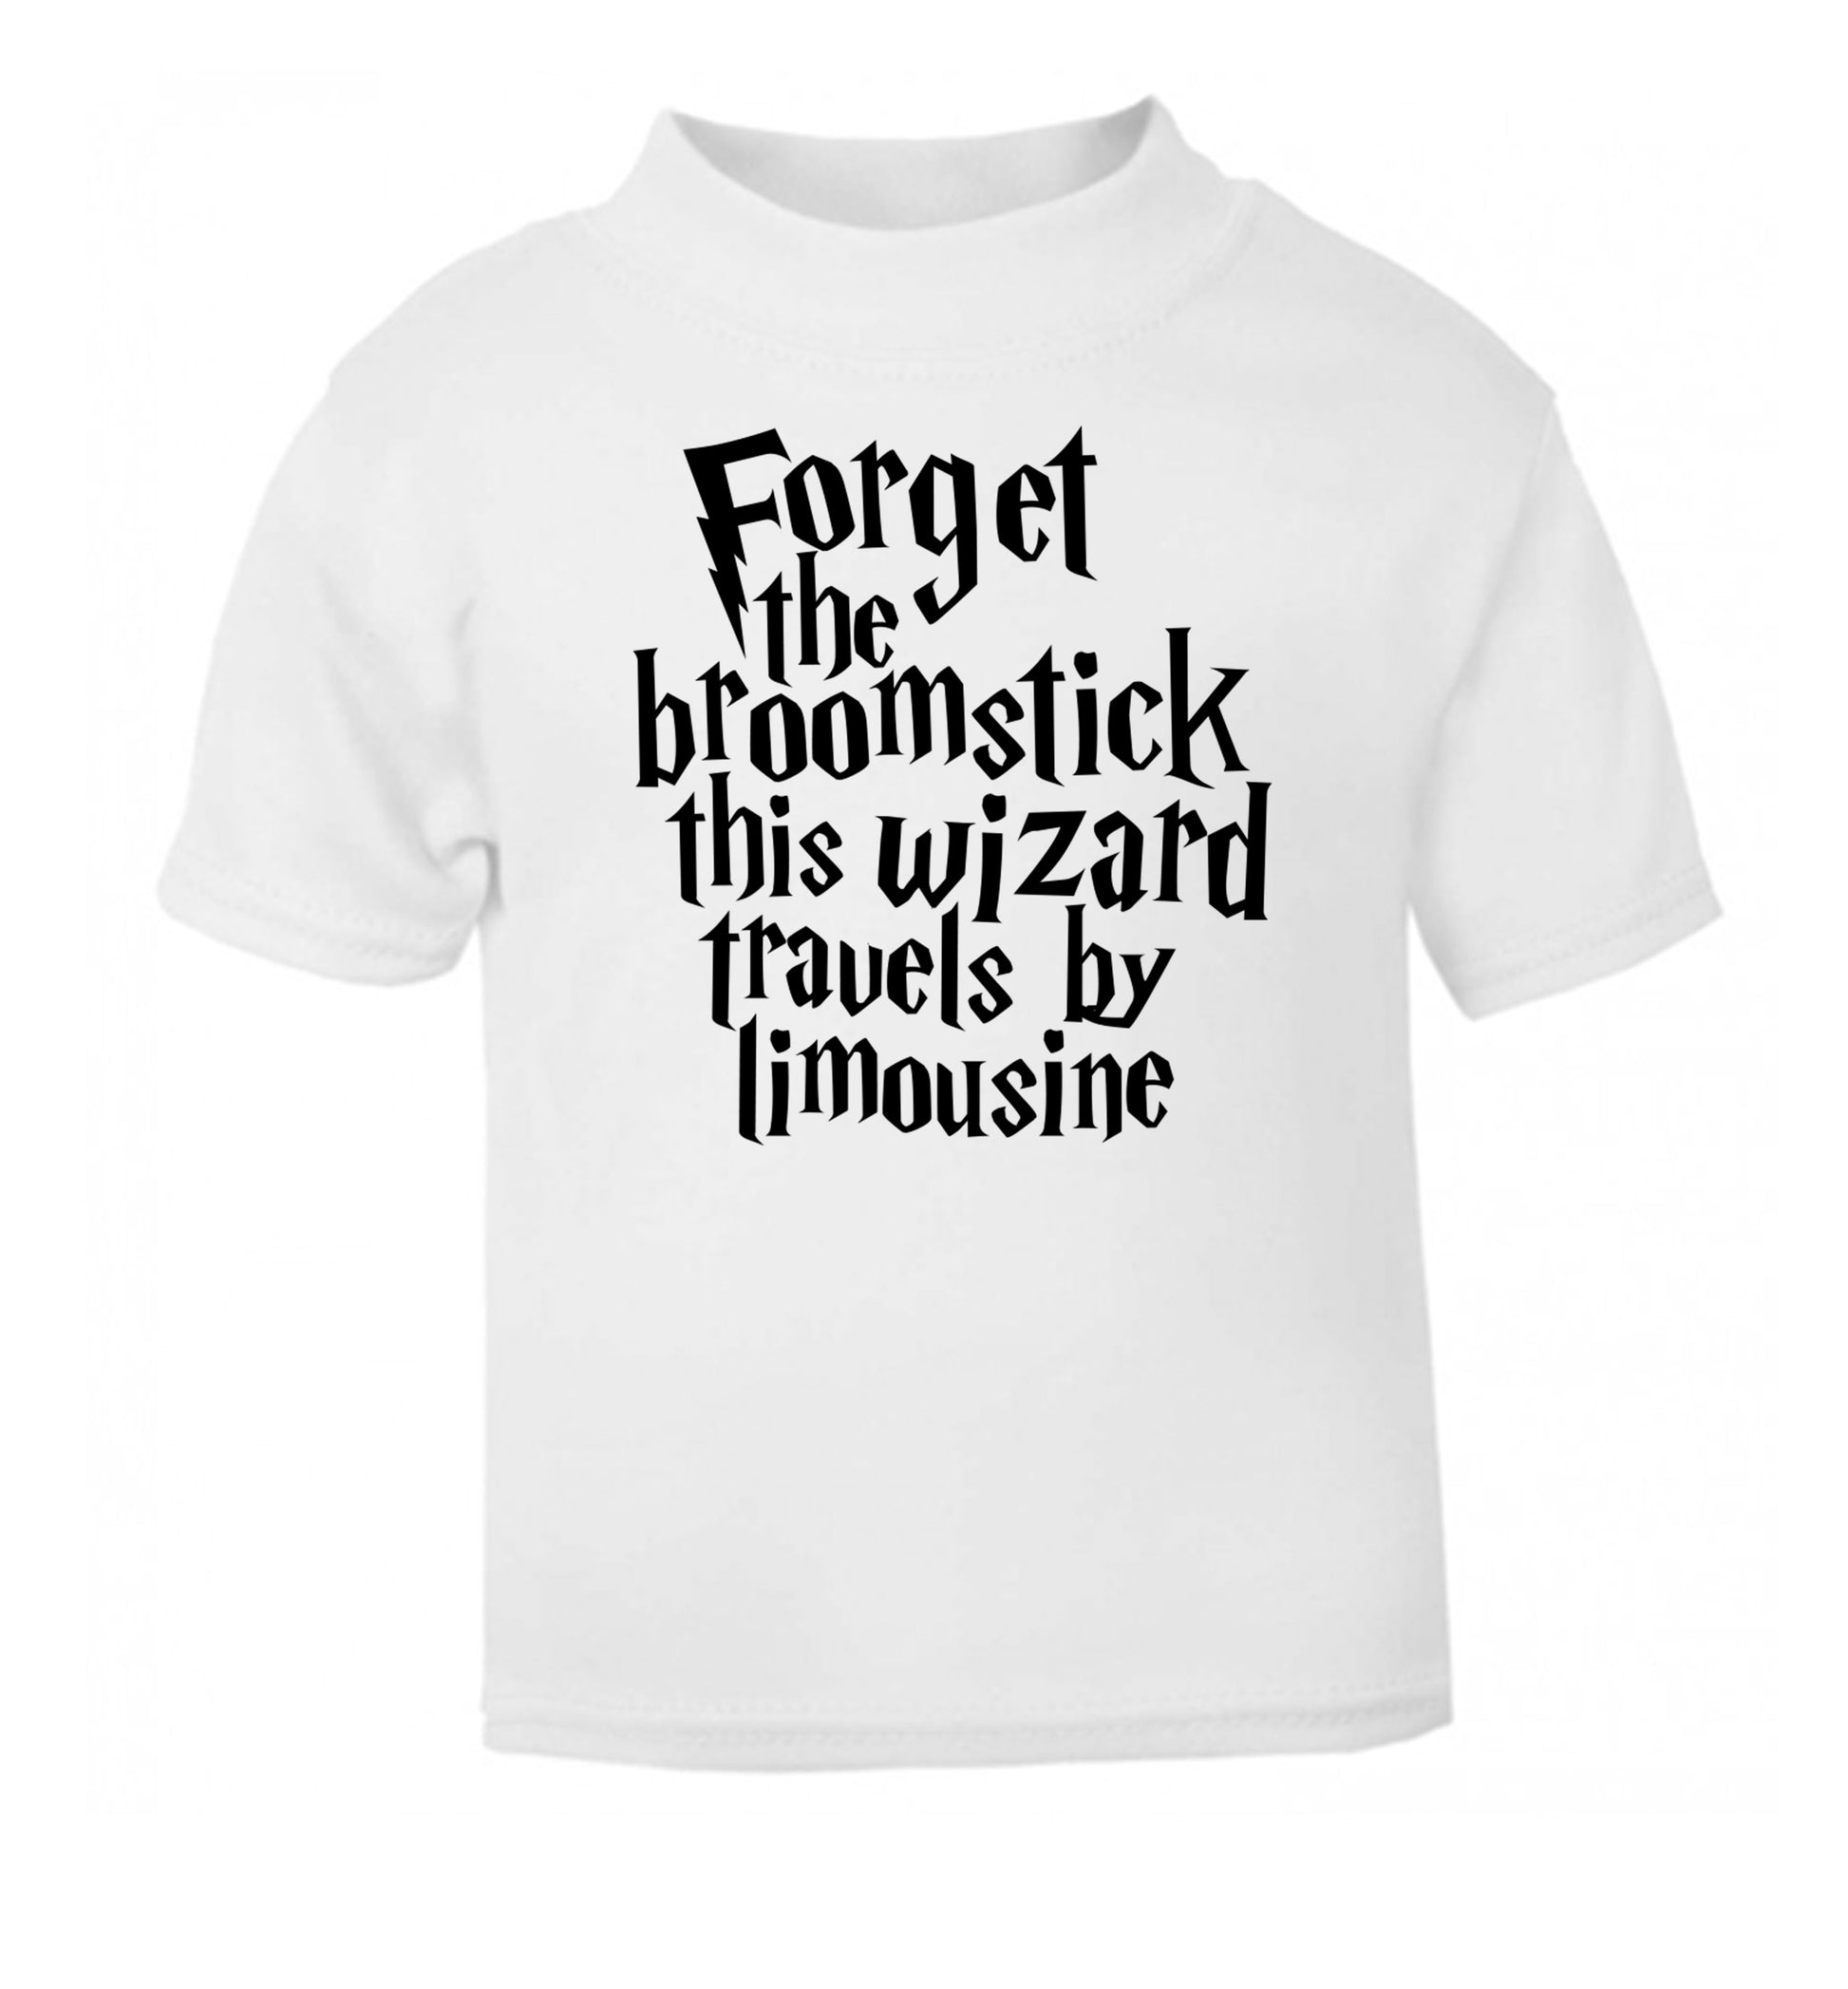 Forget the broomstick this wizard travels by limousine white Baby Toddler Tshirt 2 Years